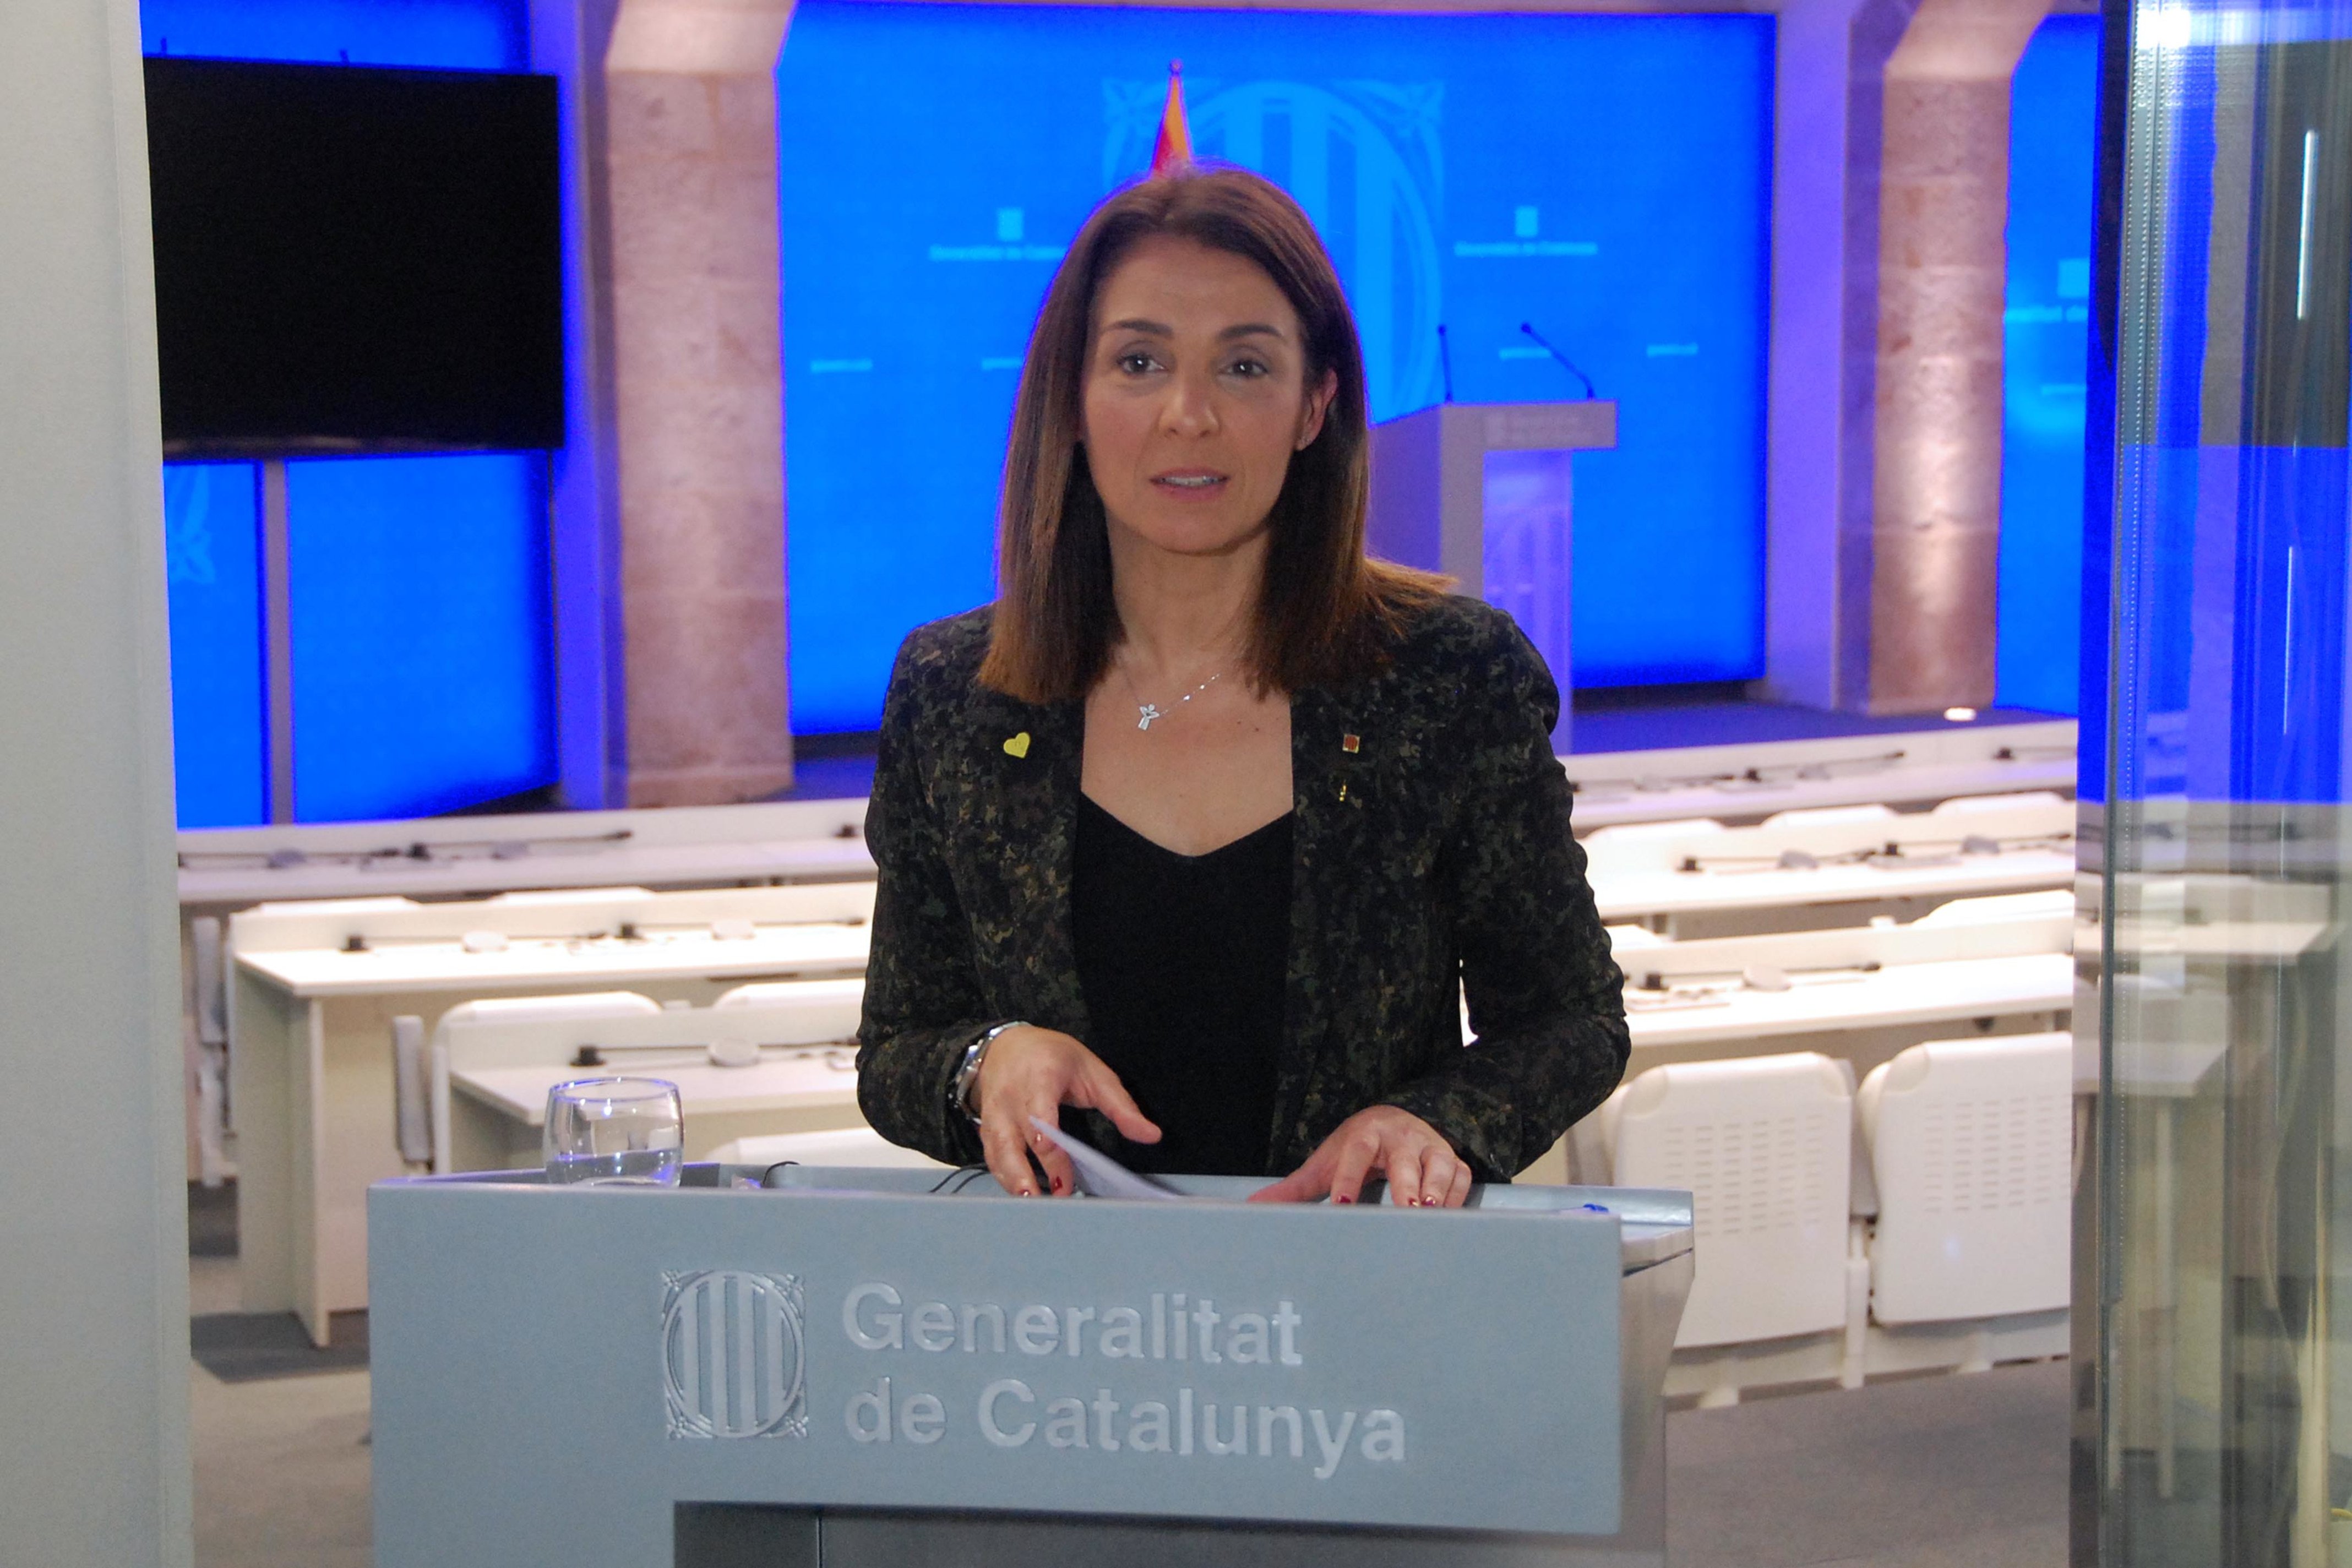 Catalan minister: "If virus resurges, those who sent people back to work will be responsible"